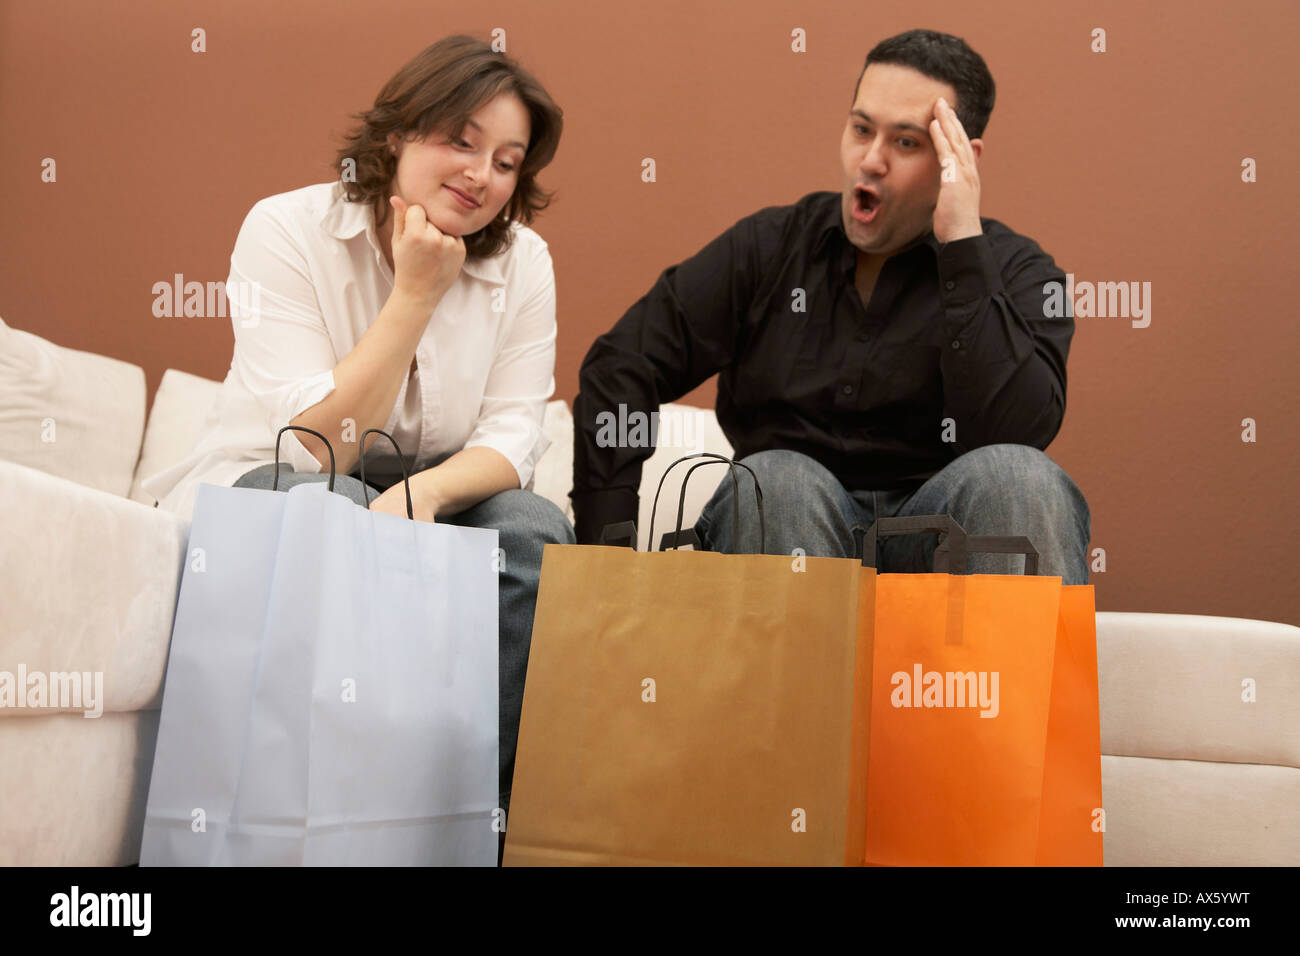 Man shocked at his wife's purchases Stock Photo